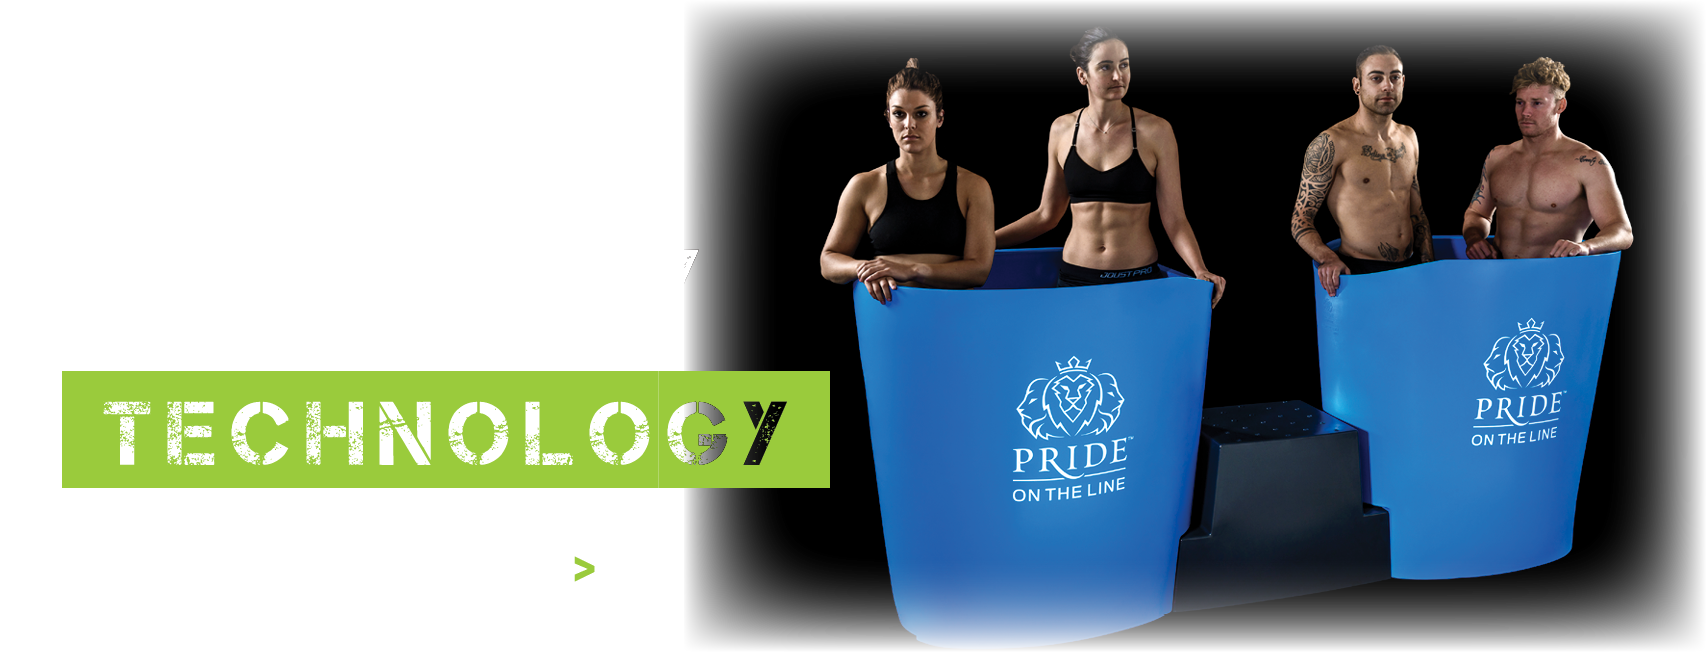 Pride on the Line Ice Baths - Recovery Technology Duo